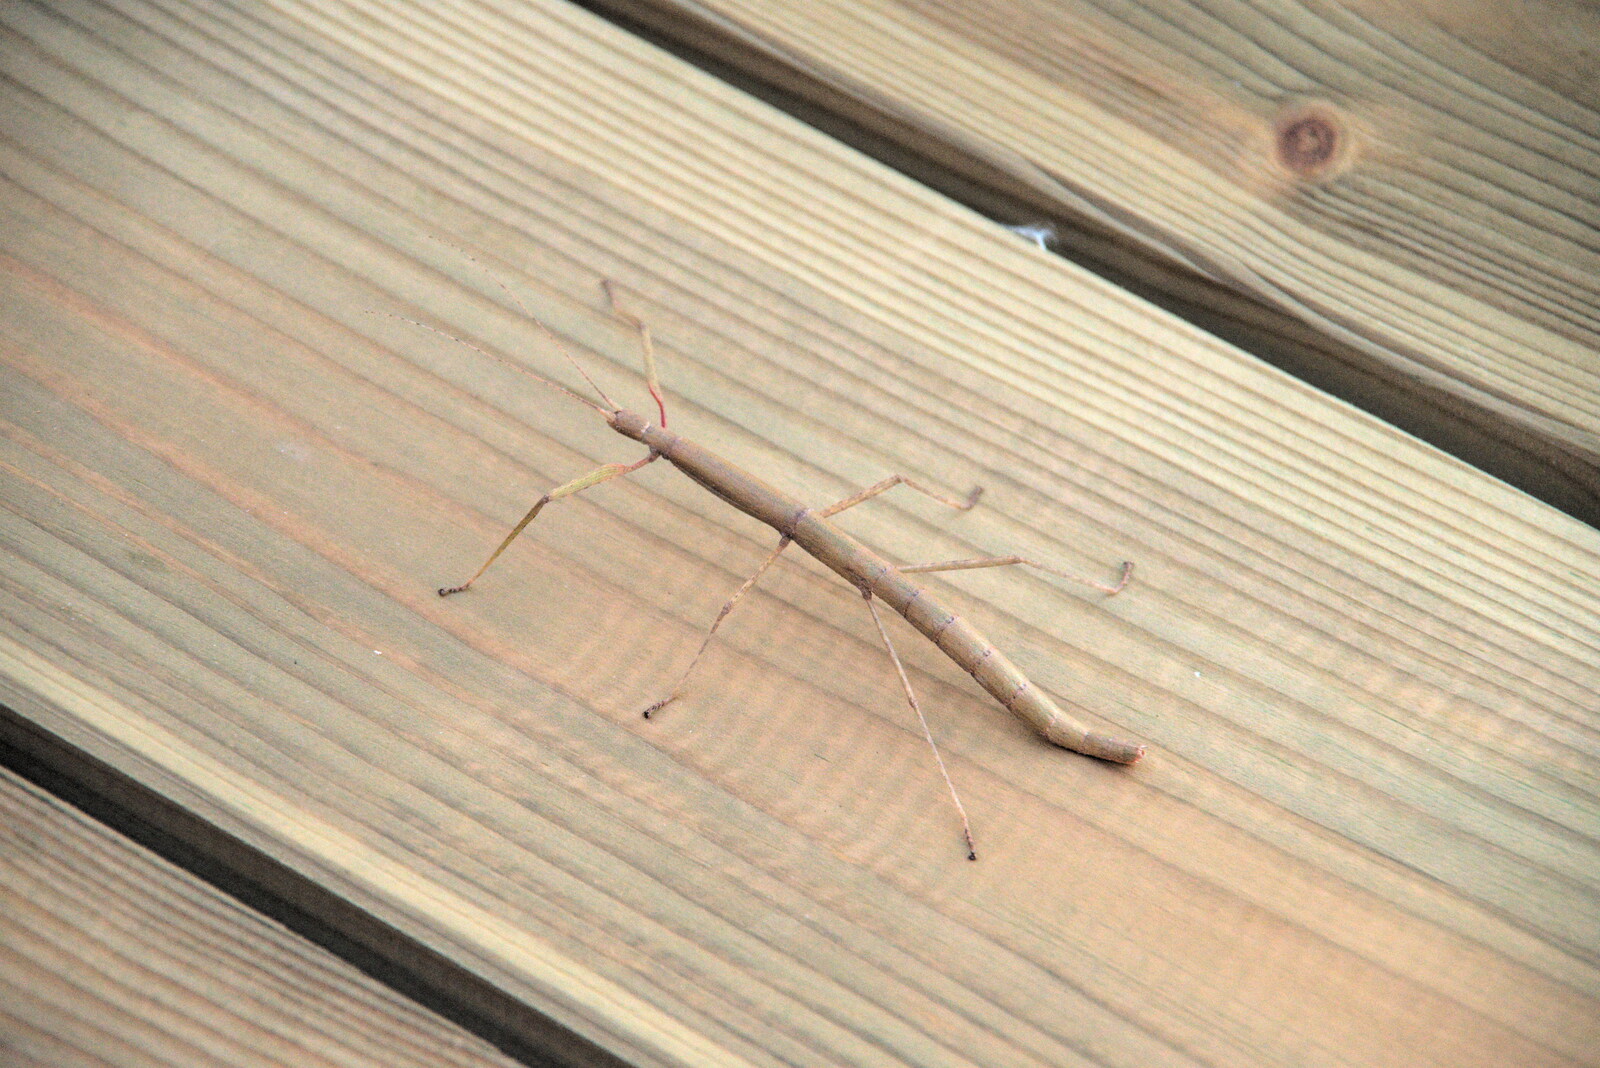 A Stick Insect comes out for a walk on the table from Jules Visits, and a Trip to Tyrrel's Wood, Pulham Market, Norfolk - 16th August 2020